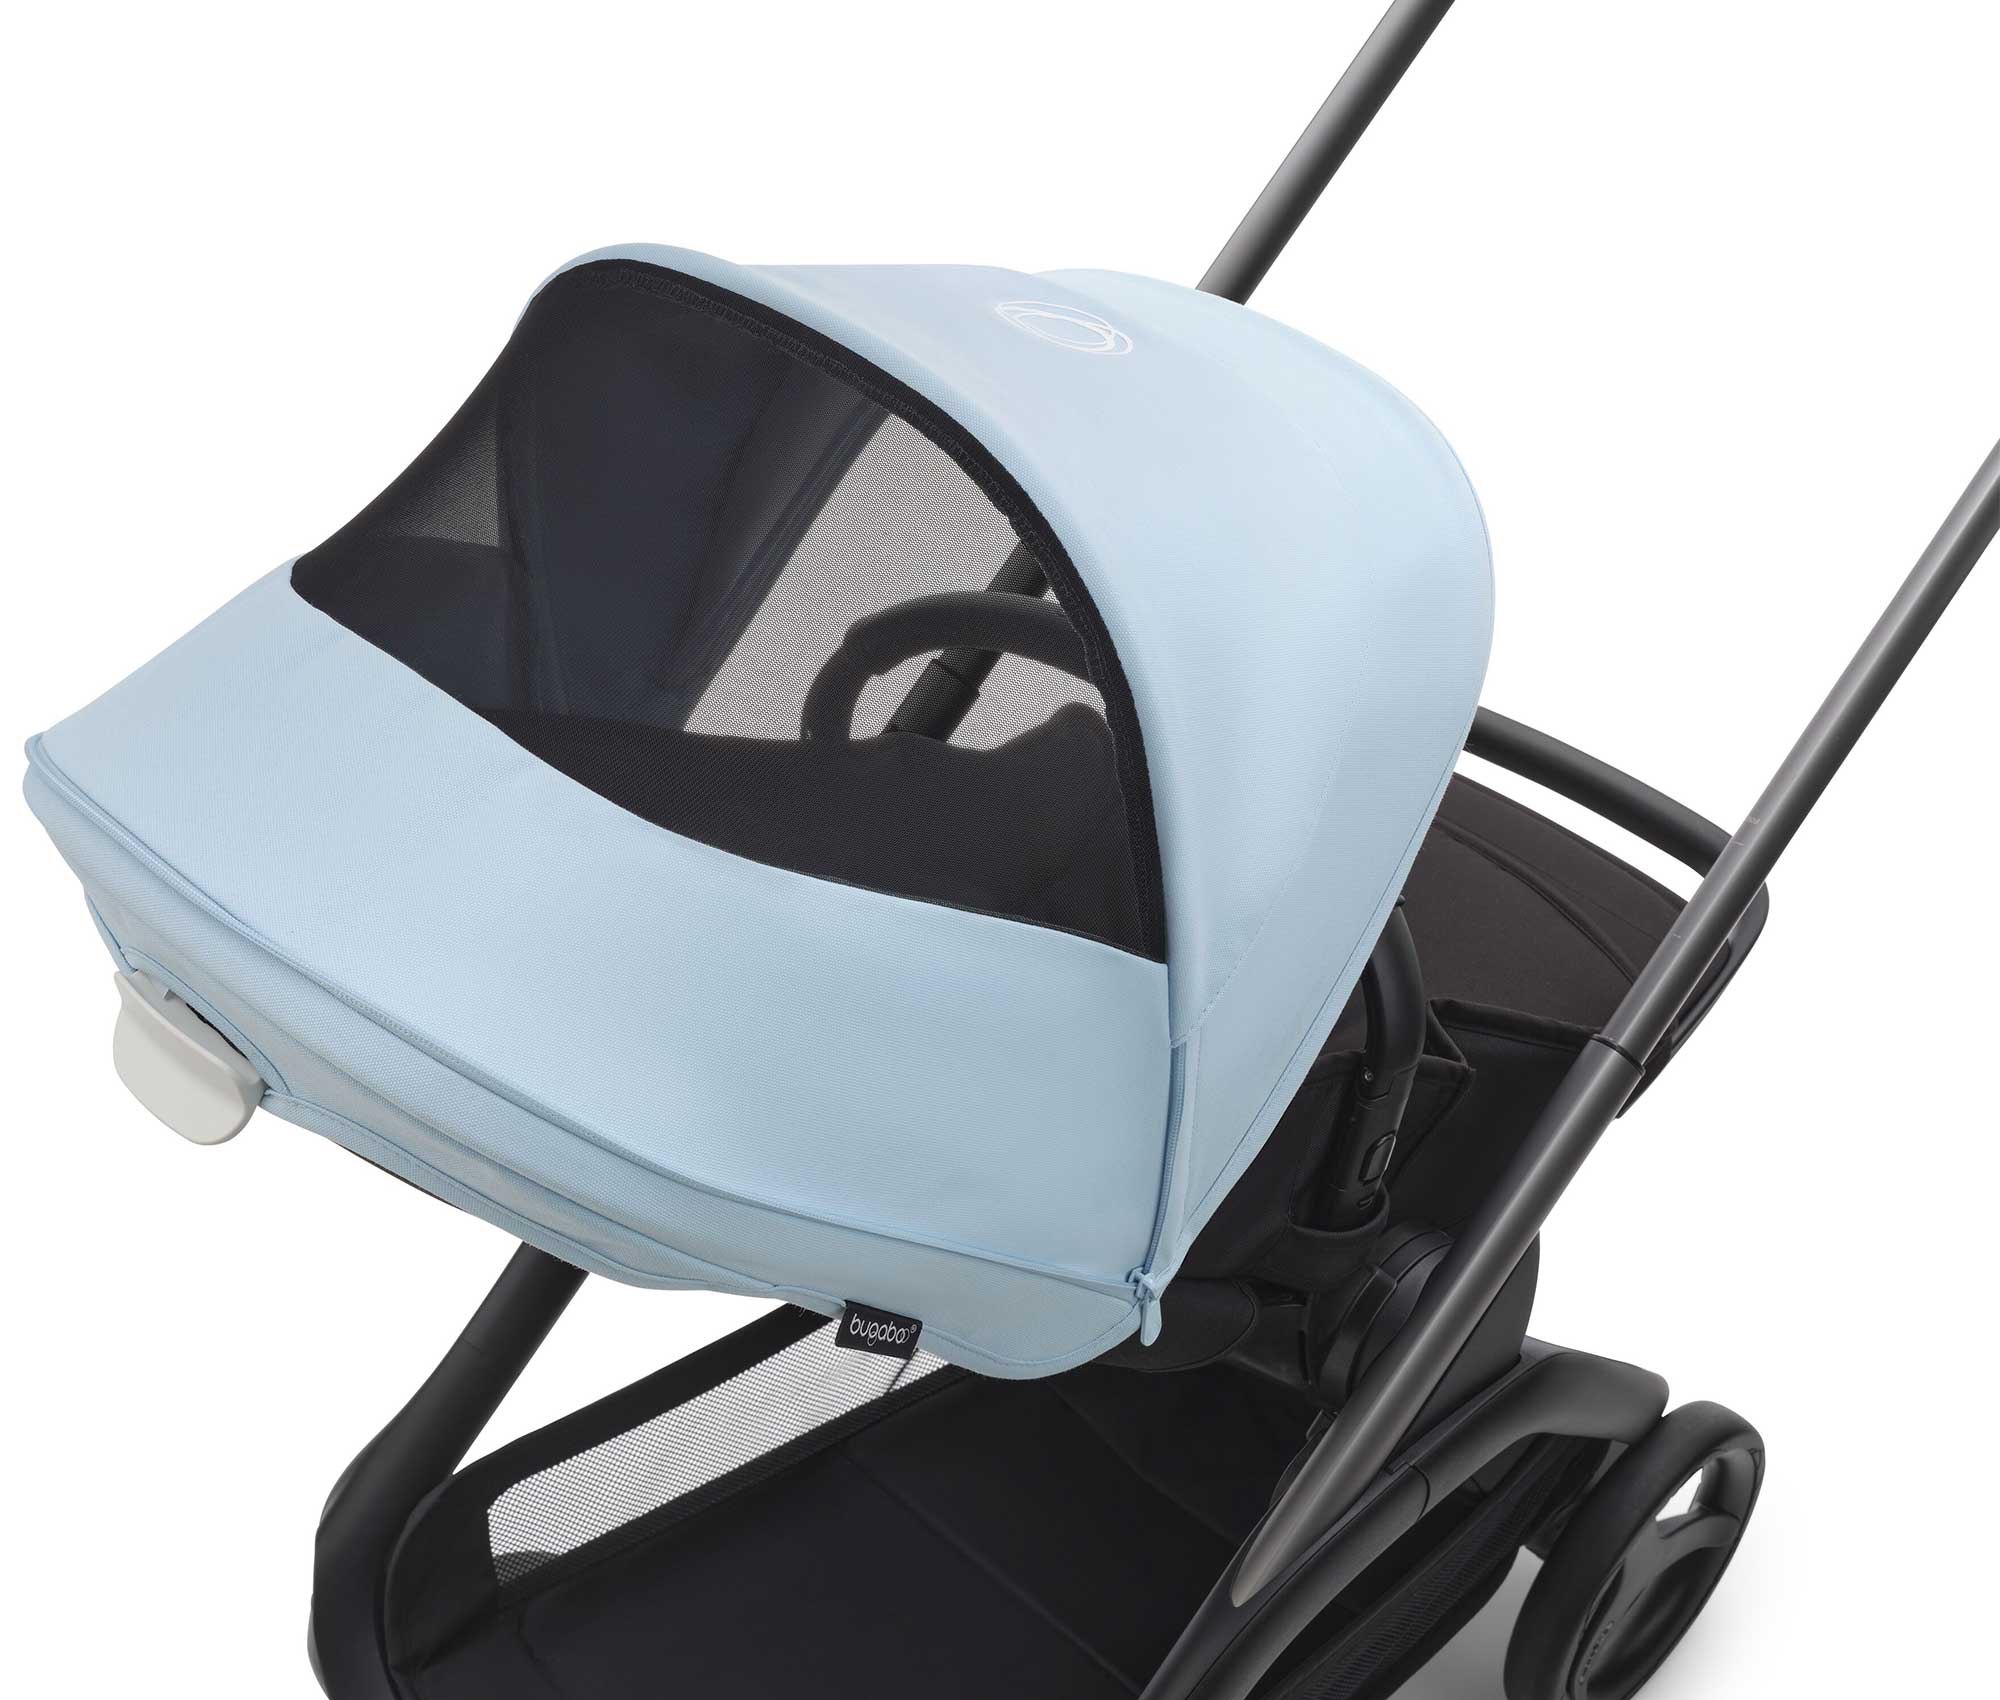 Bugaboo Travel Systems Bugaboo Dragonfly Pebble 360 Pro Travel System in Graphite/Midnight Black/Skyline Blue 13816-GRA-MID-SKY